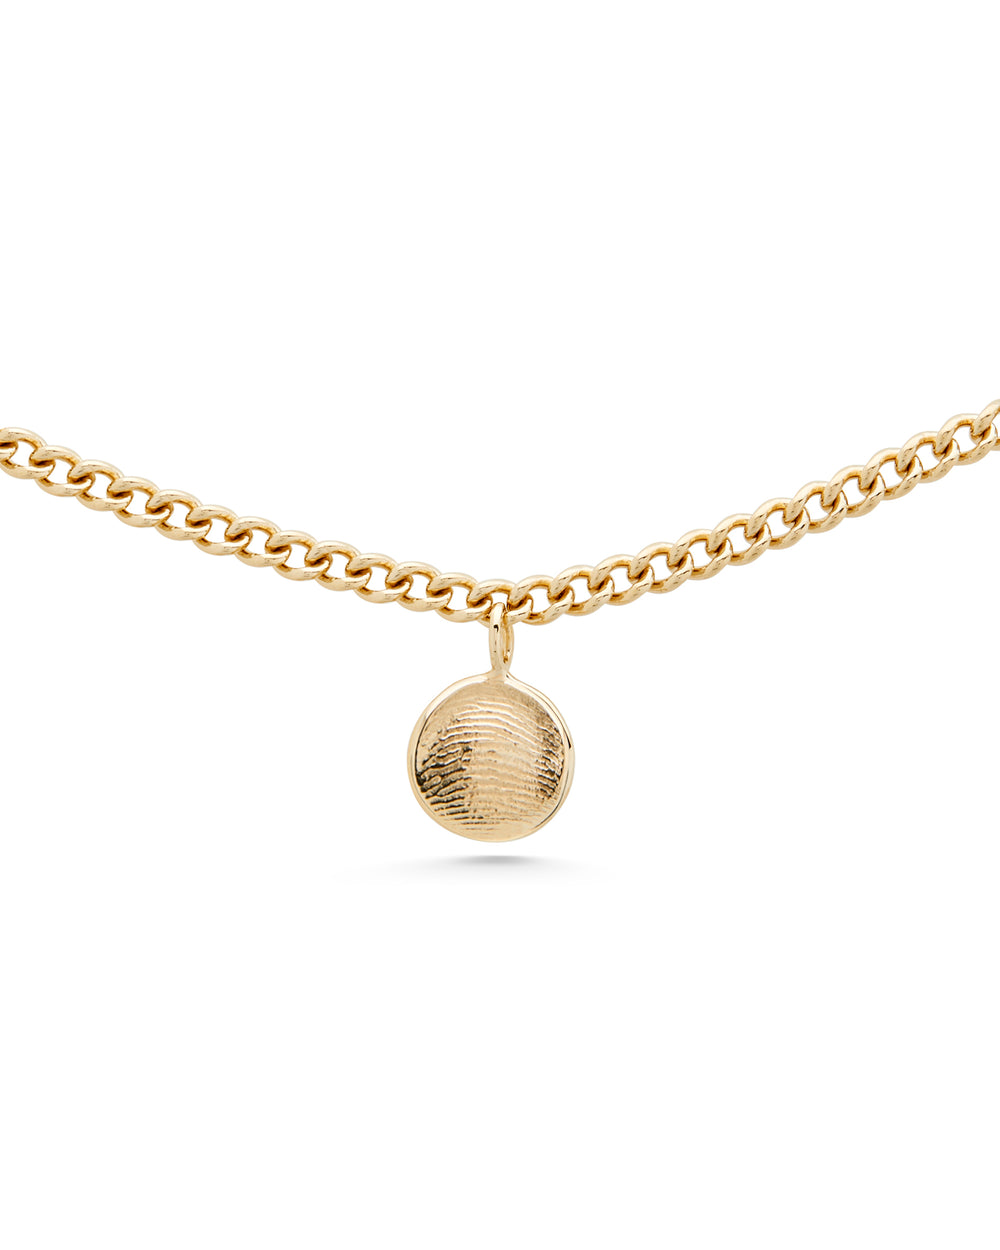 Impression Charm Necklace | Yellow Gold